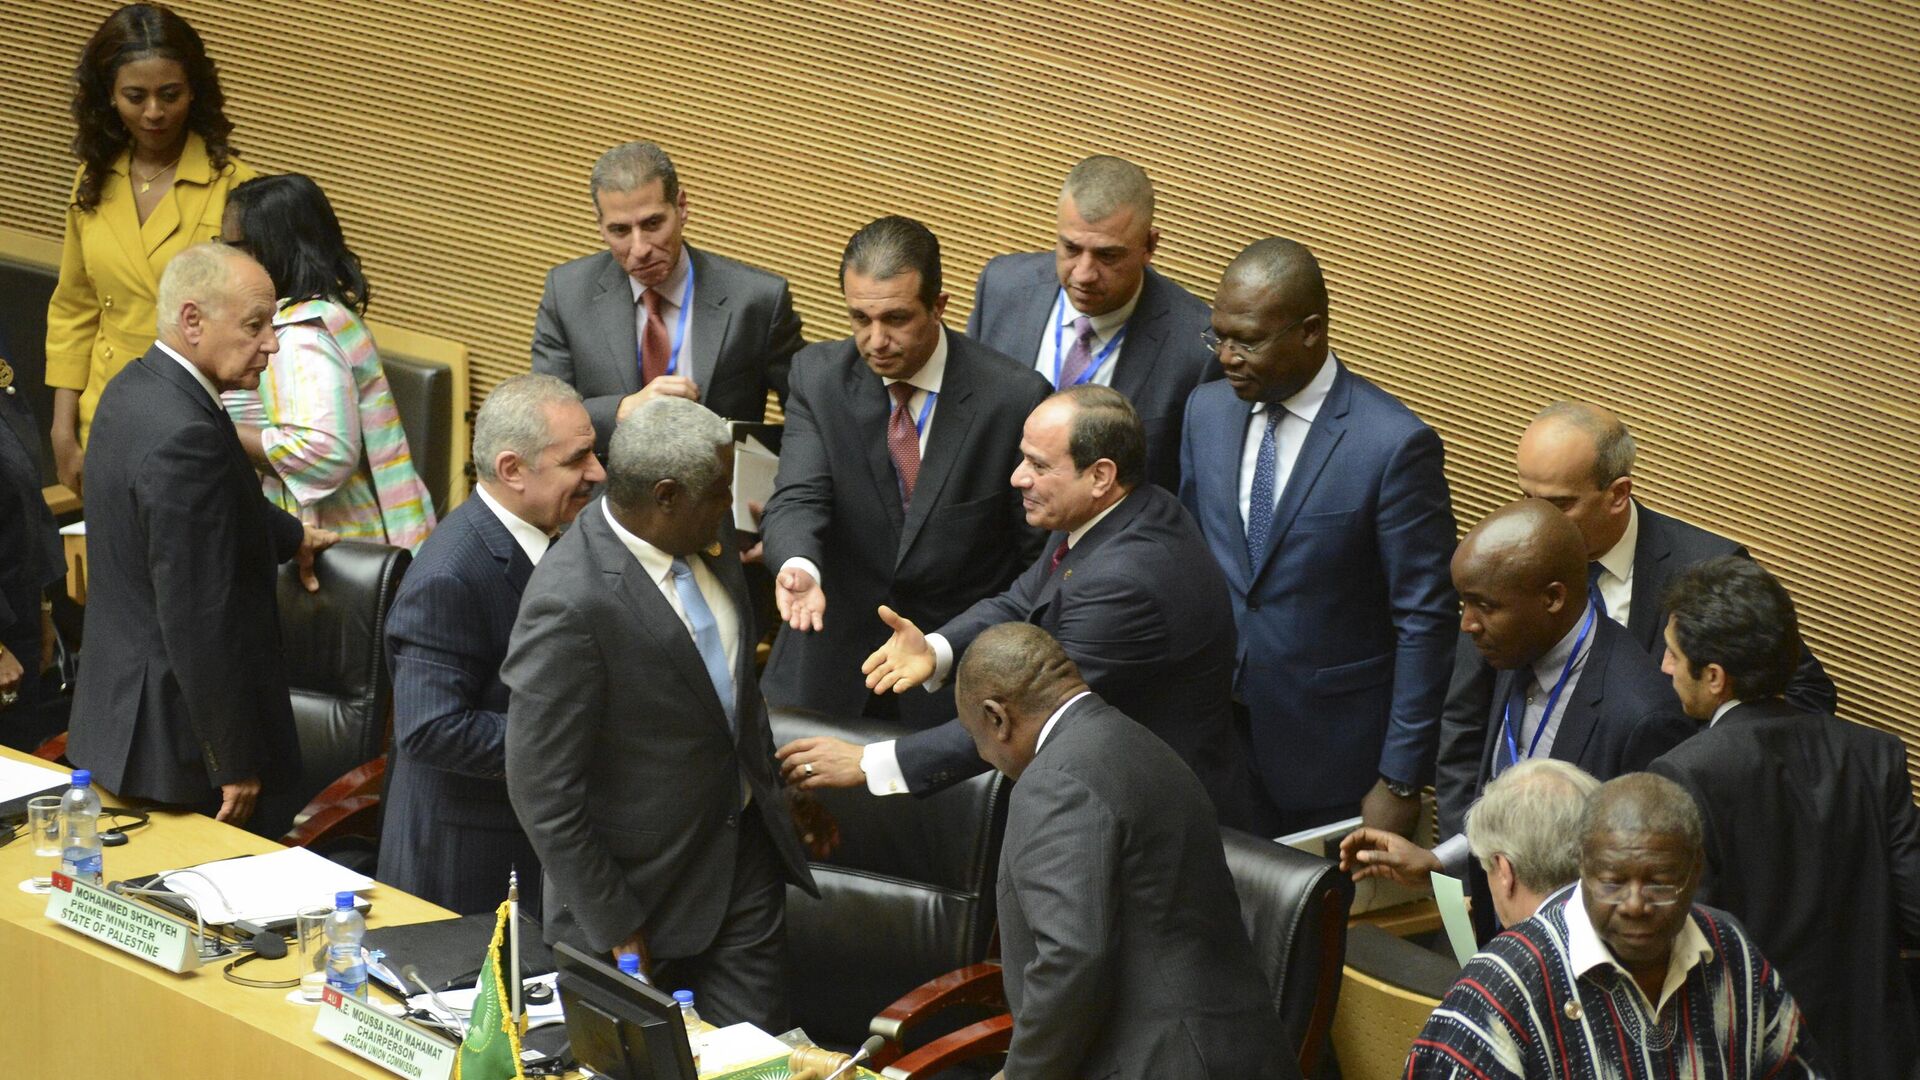 Egypt's President Abdel-Fattah el-Sissi, center, the outgoing Chairman of the African Union (AU), is greeted at opening session of the 33rd AU Summit where he was to hand over the chairmanship to South Africa's President Cyril Ramaphosa, at the AU headquarters in Addis Ababa, Ethiopia Sunday, Feb. 9, 2020.  - Sputnik Africa, 1920, 19.05.2023